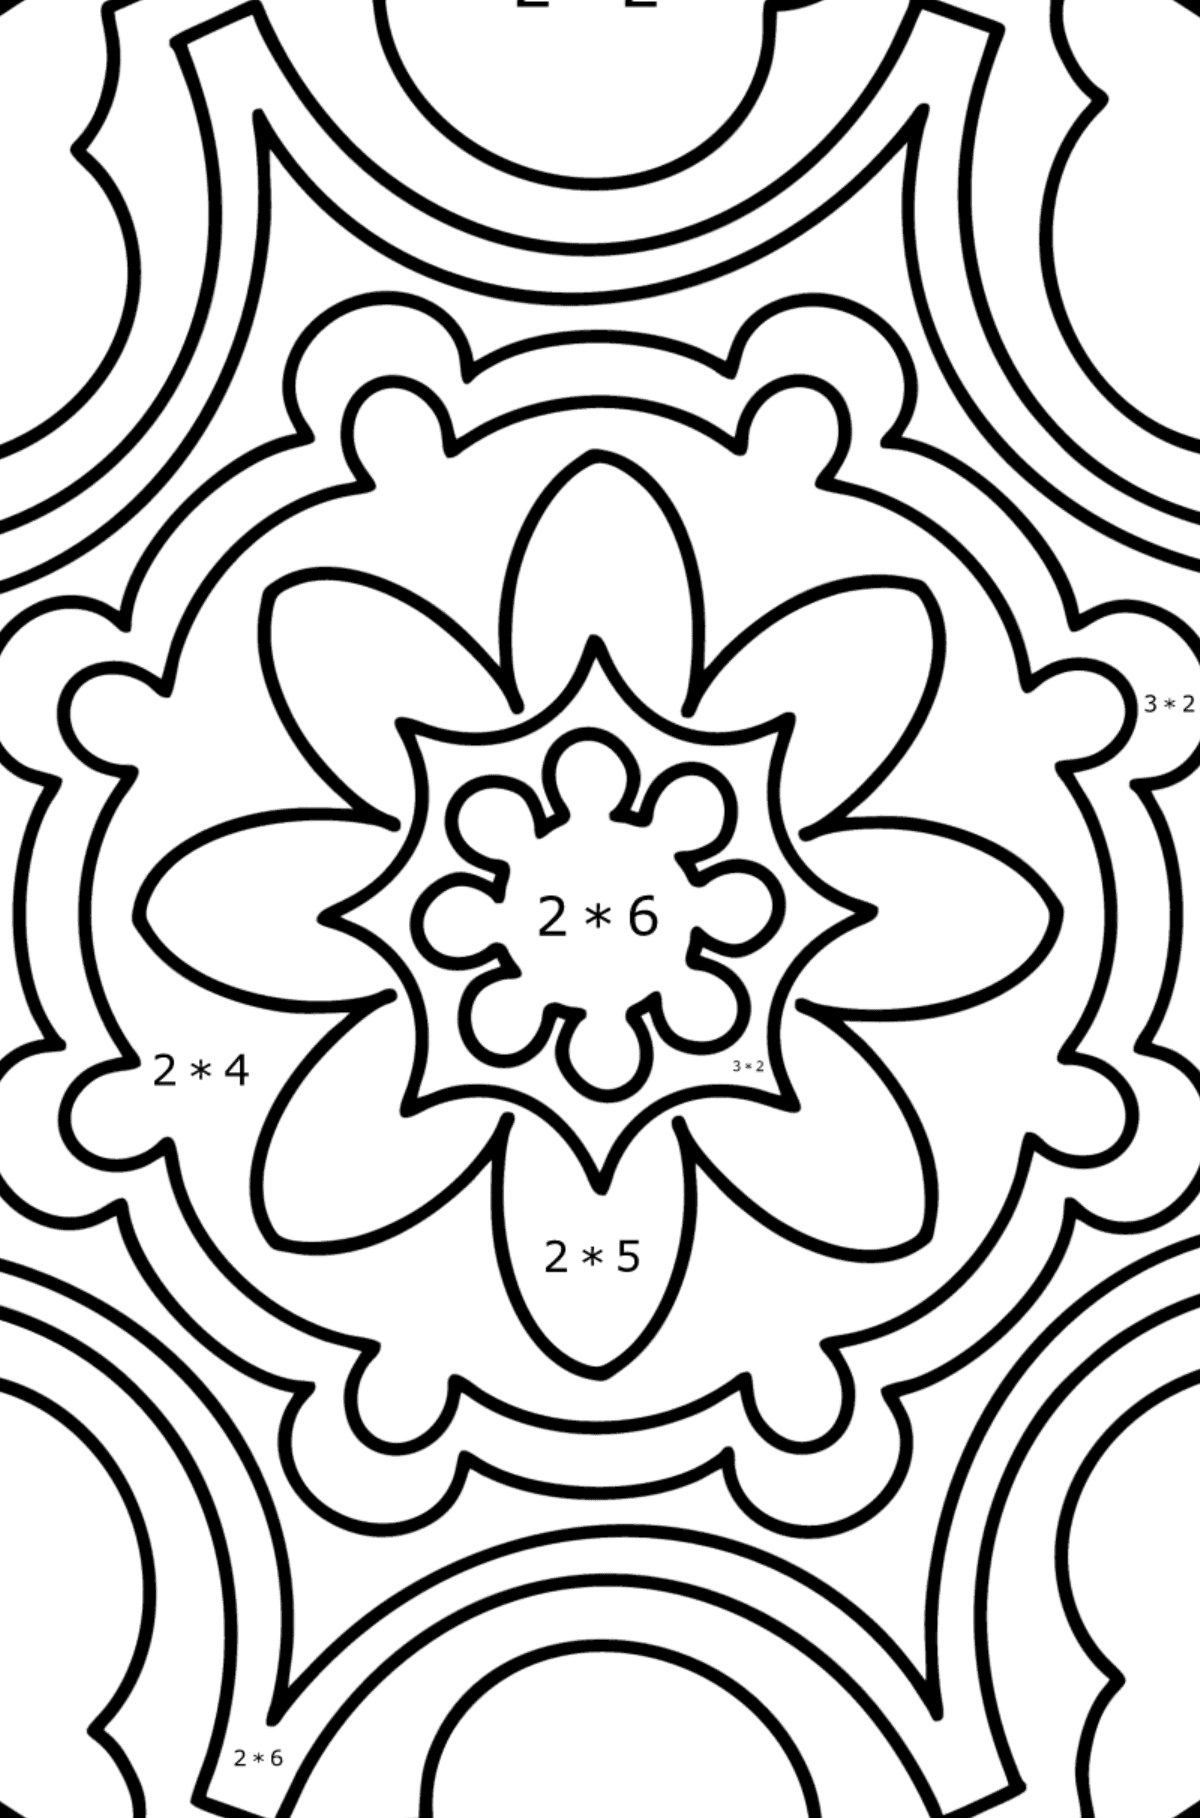 Mandala coloring page - 9 elements - Math Coloring - Multiplication for Kids